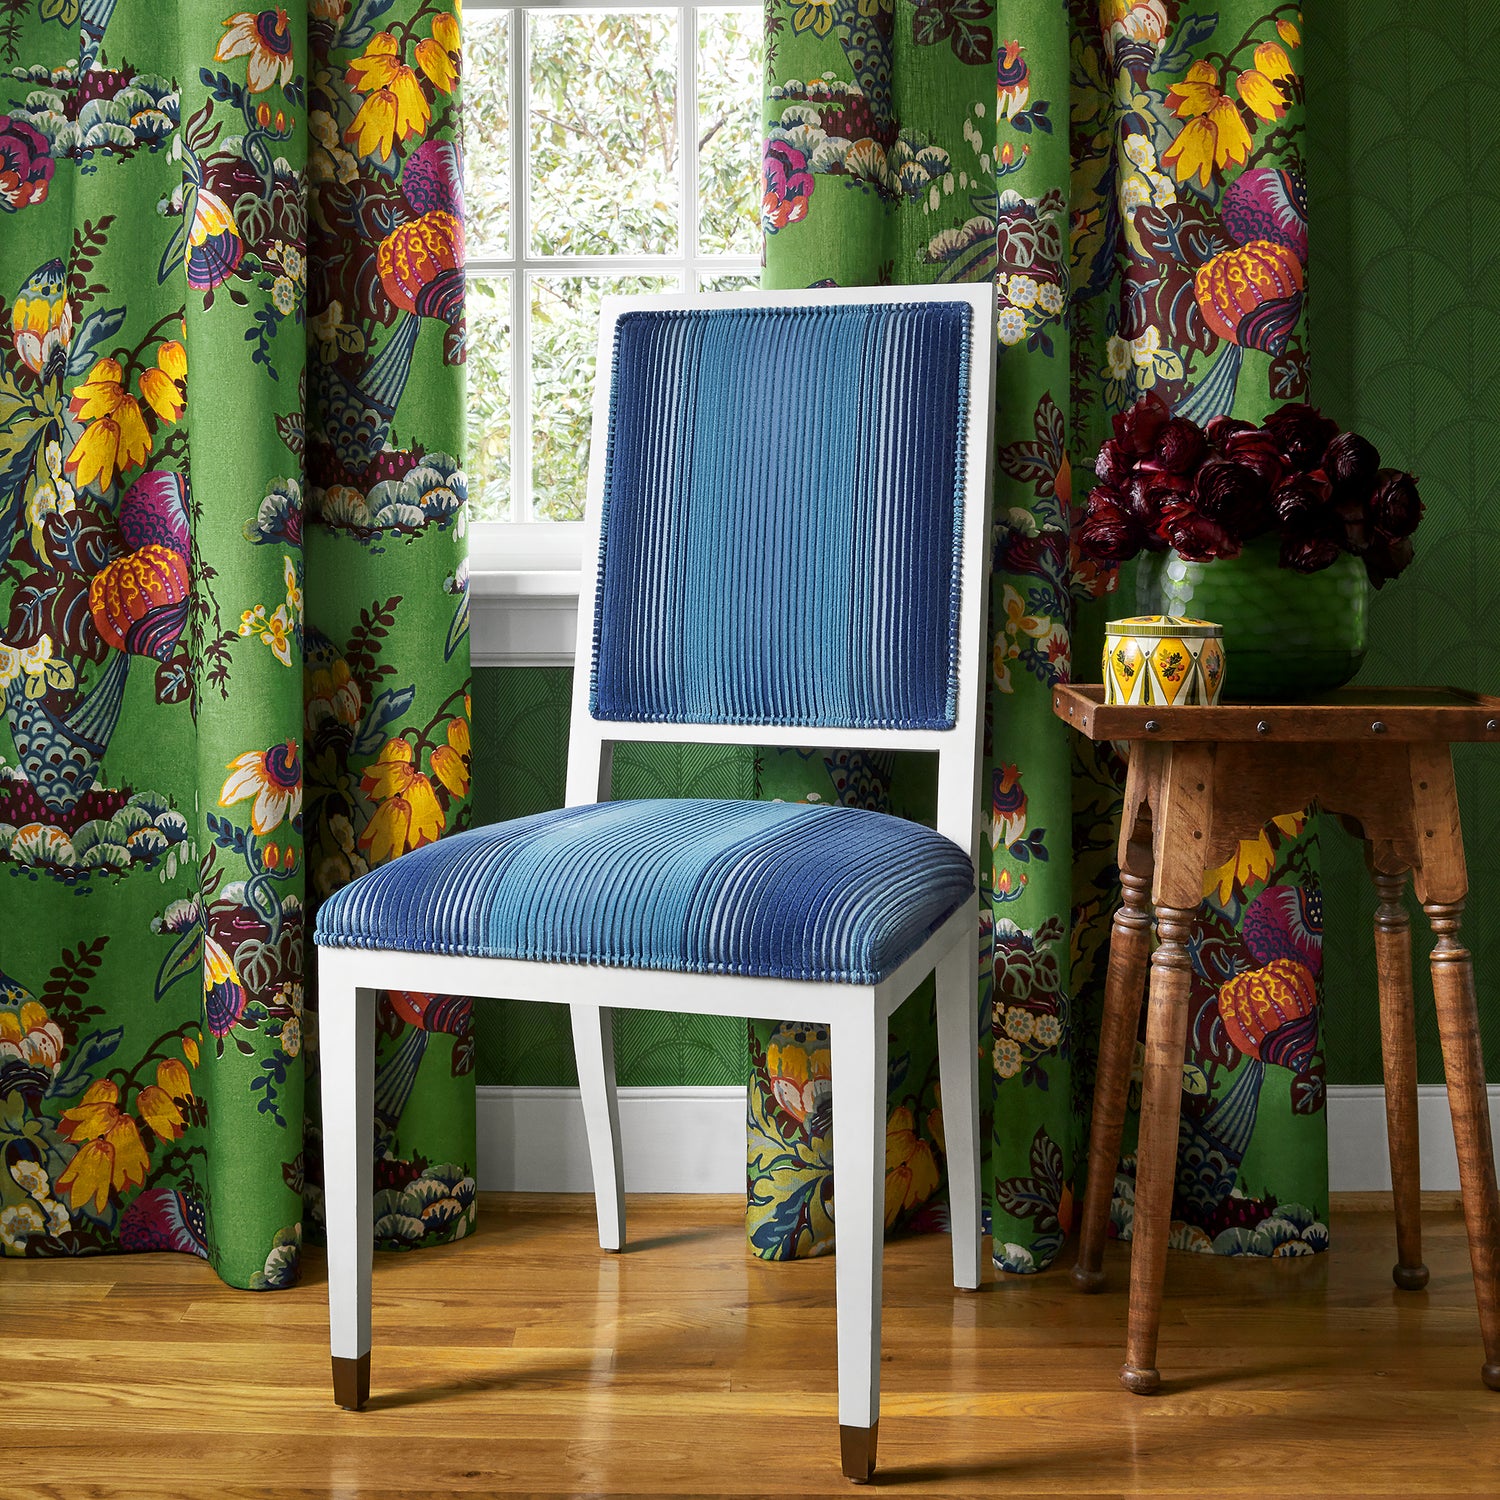 Room with draperies in Fairbanks fabric in green color - pattern number AF9644 - by Anna French